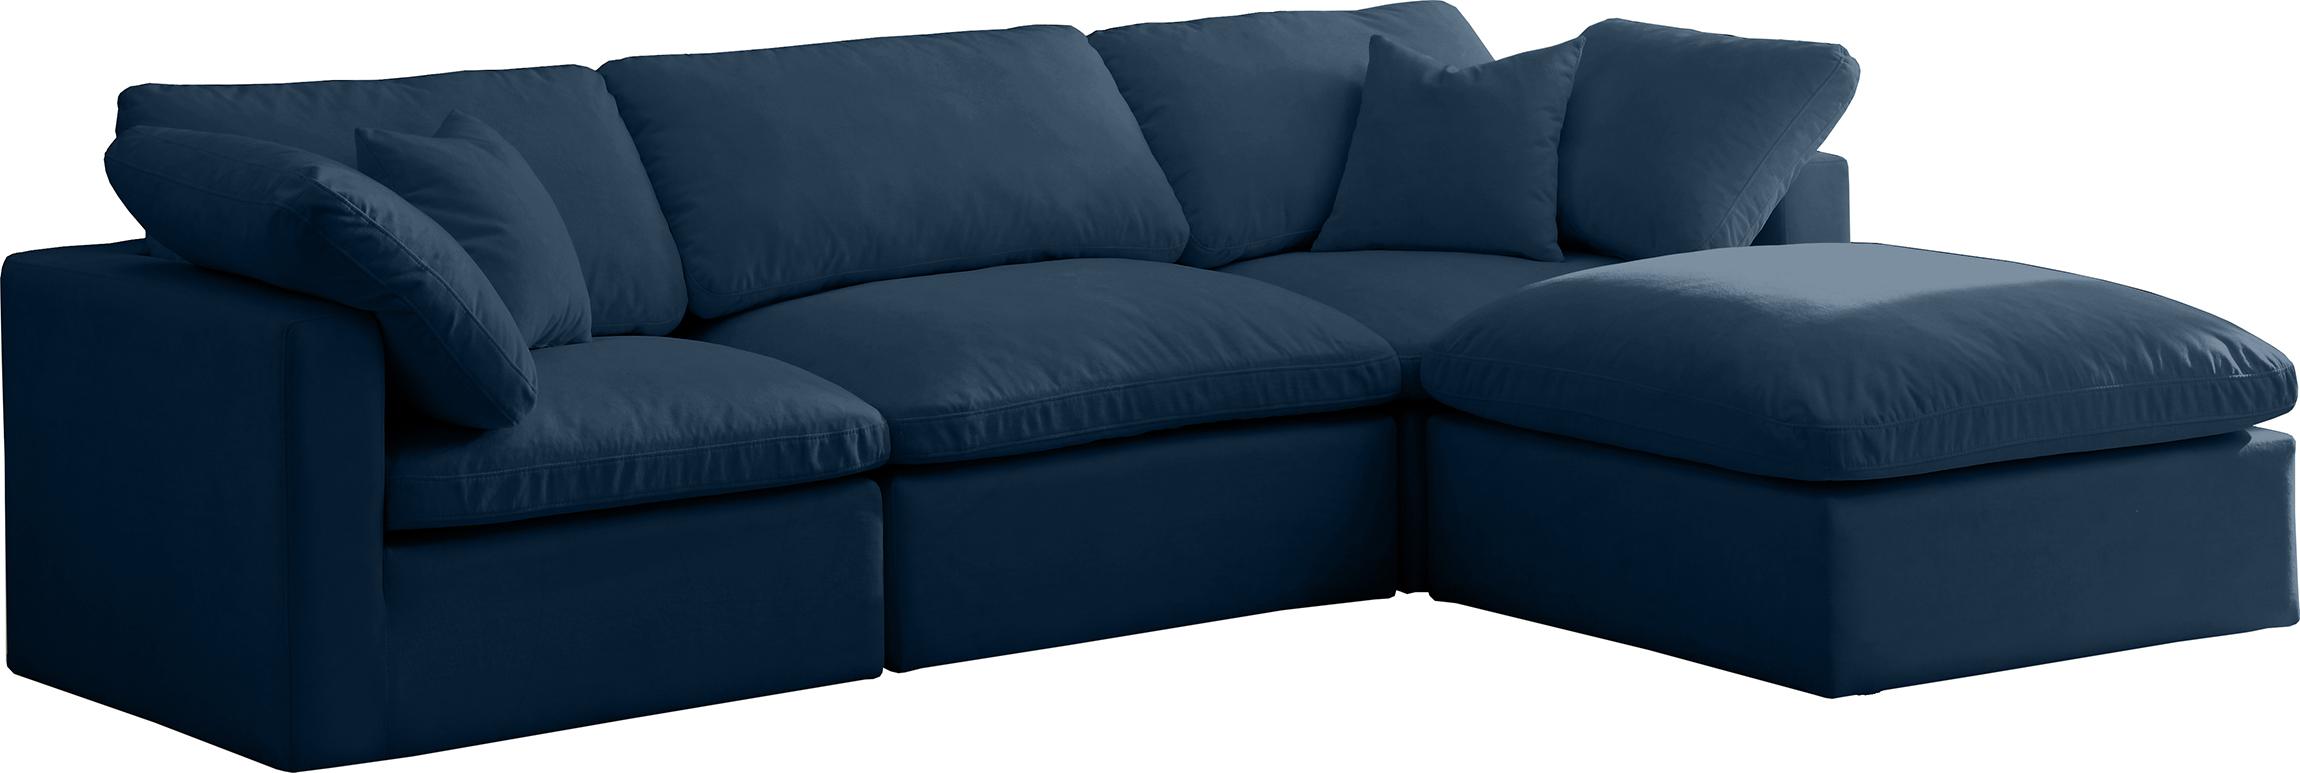 Contemporary, Modern Sectional Sofa Cloud NAVY NAVY-Sec-Cloud in Navy Fabric